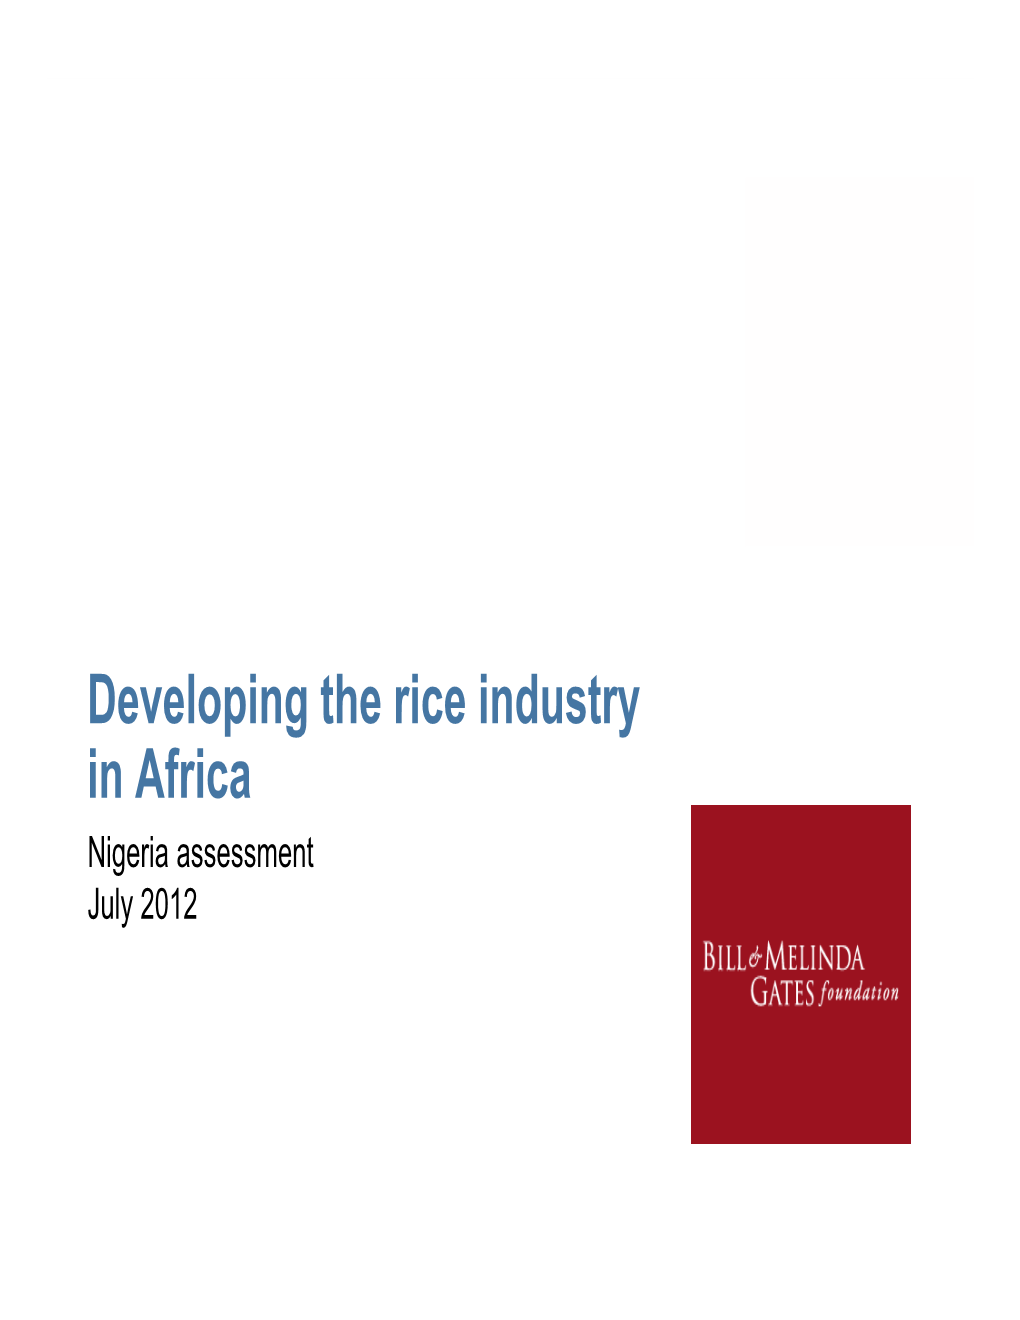 Developing the Rice Industry in Africa Nigeria Assessment July 2012 Agenda